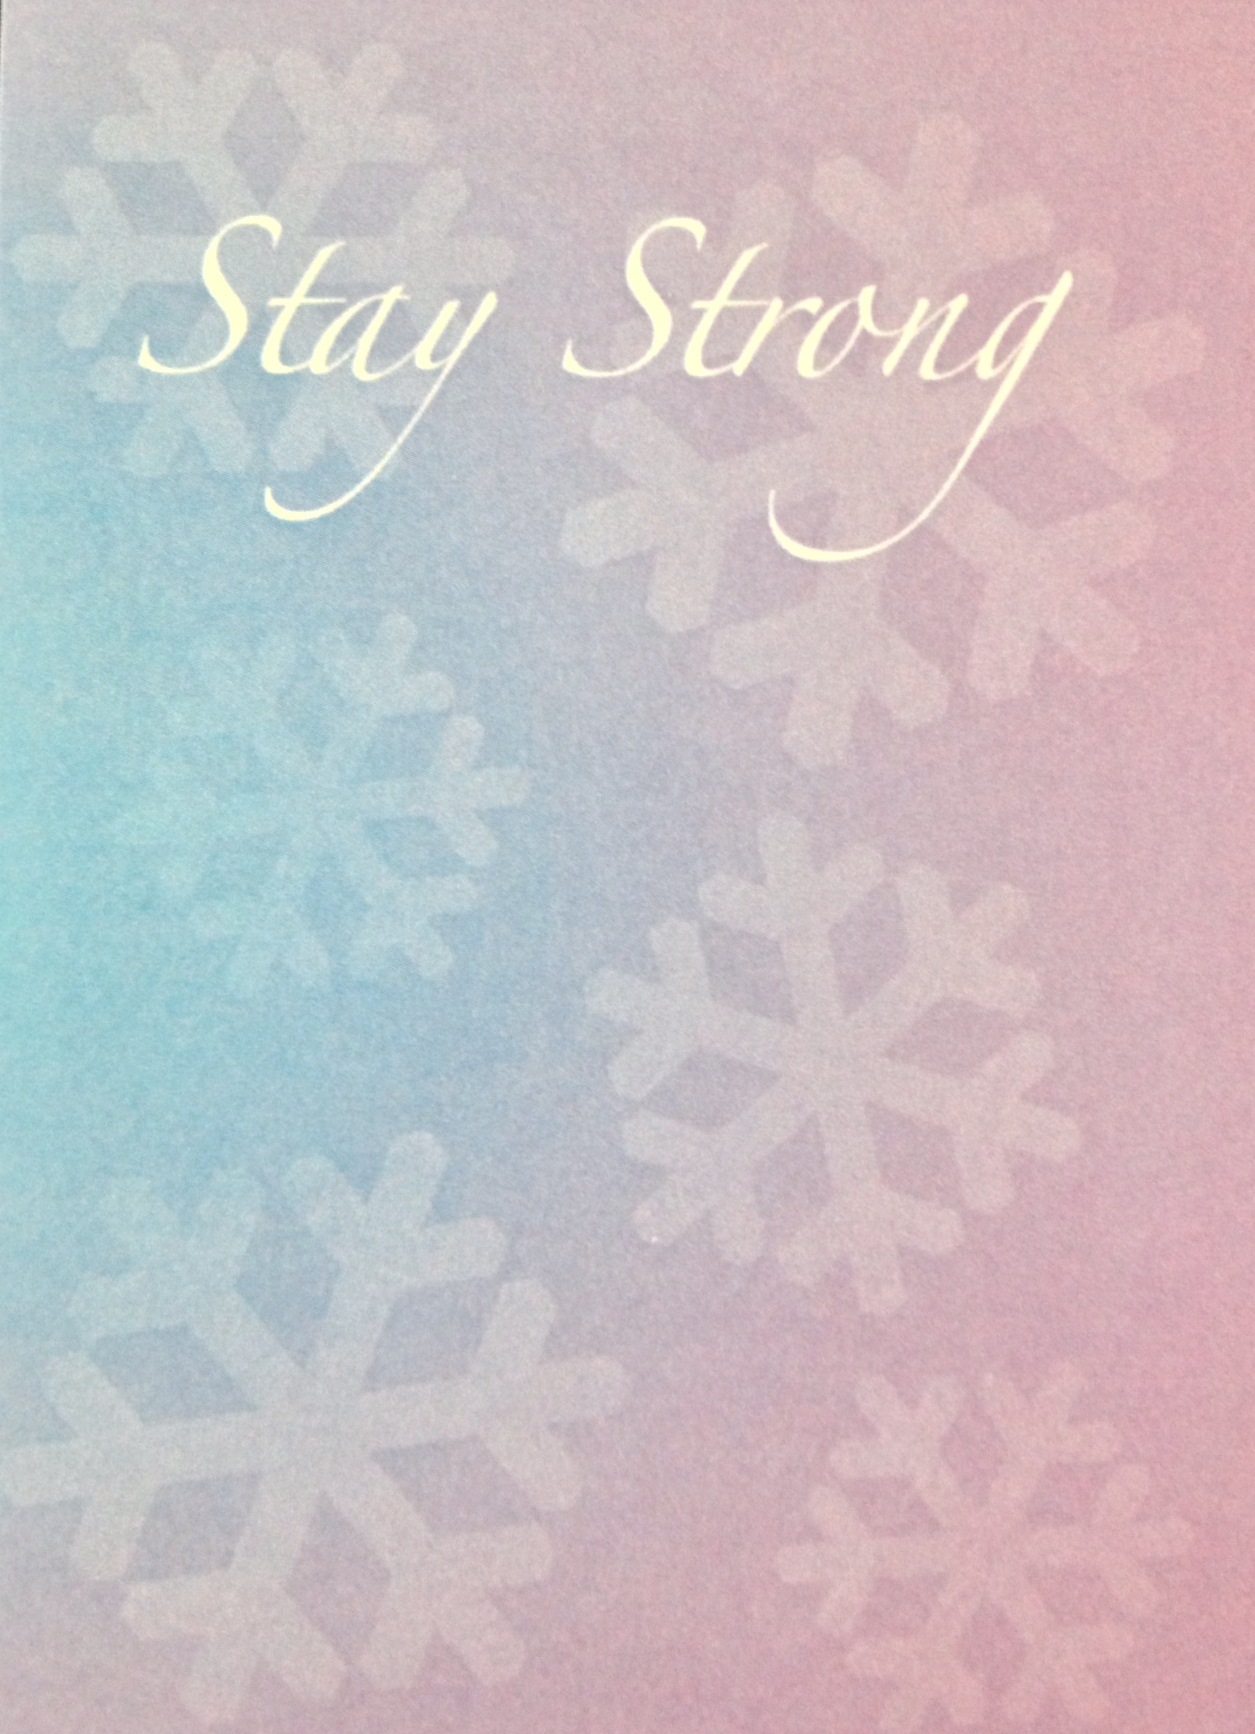 Stay Strong Background Jpg Amanda Todd Legacy Official Website